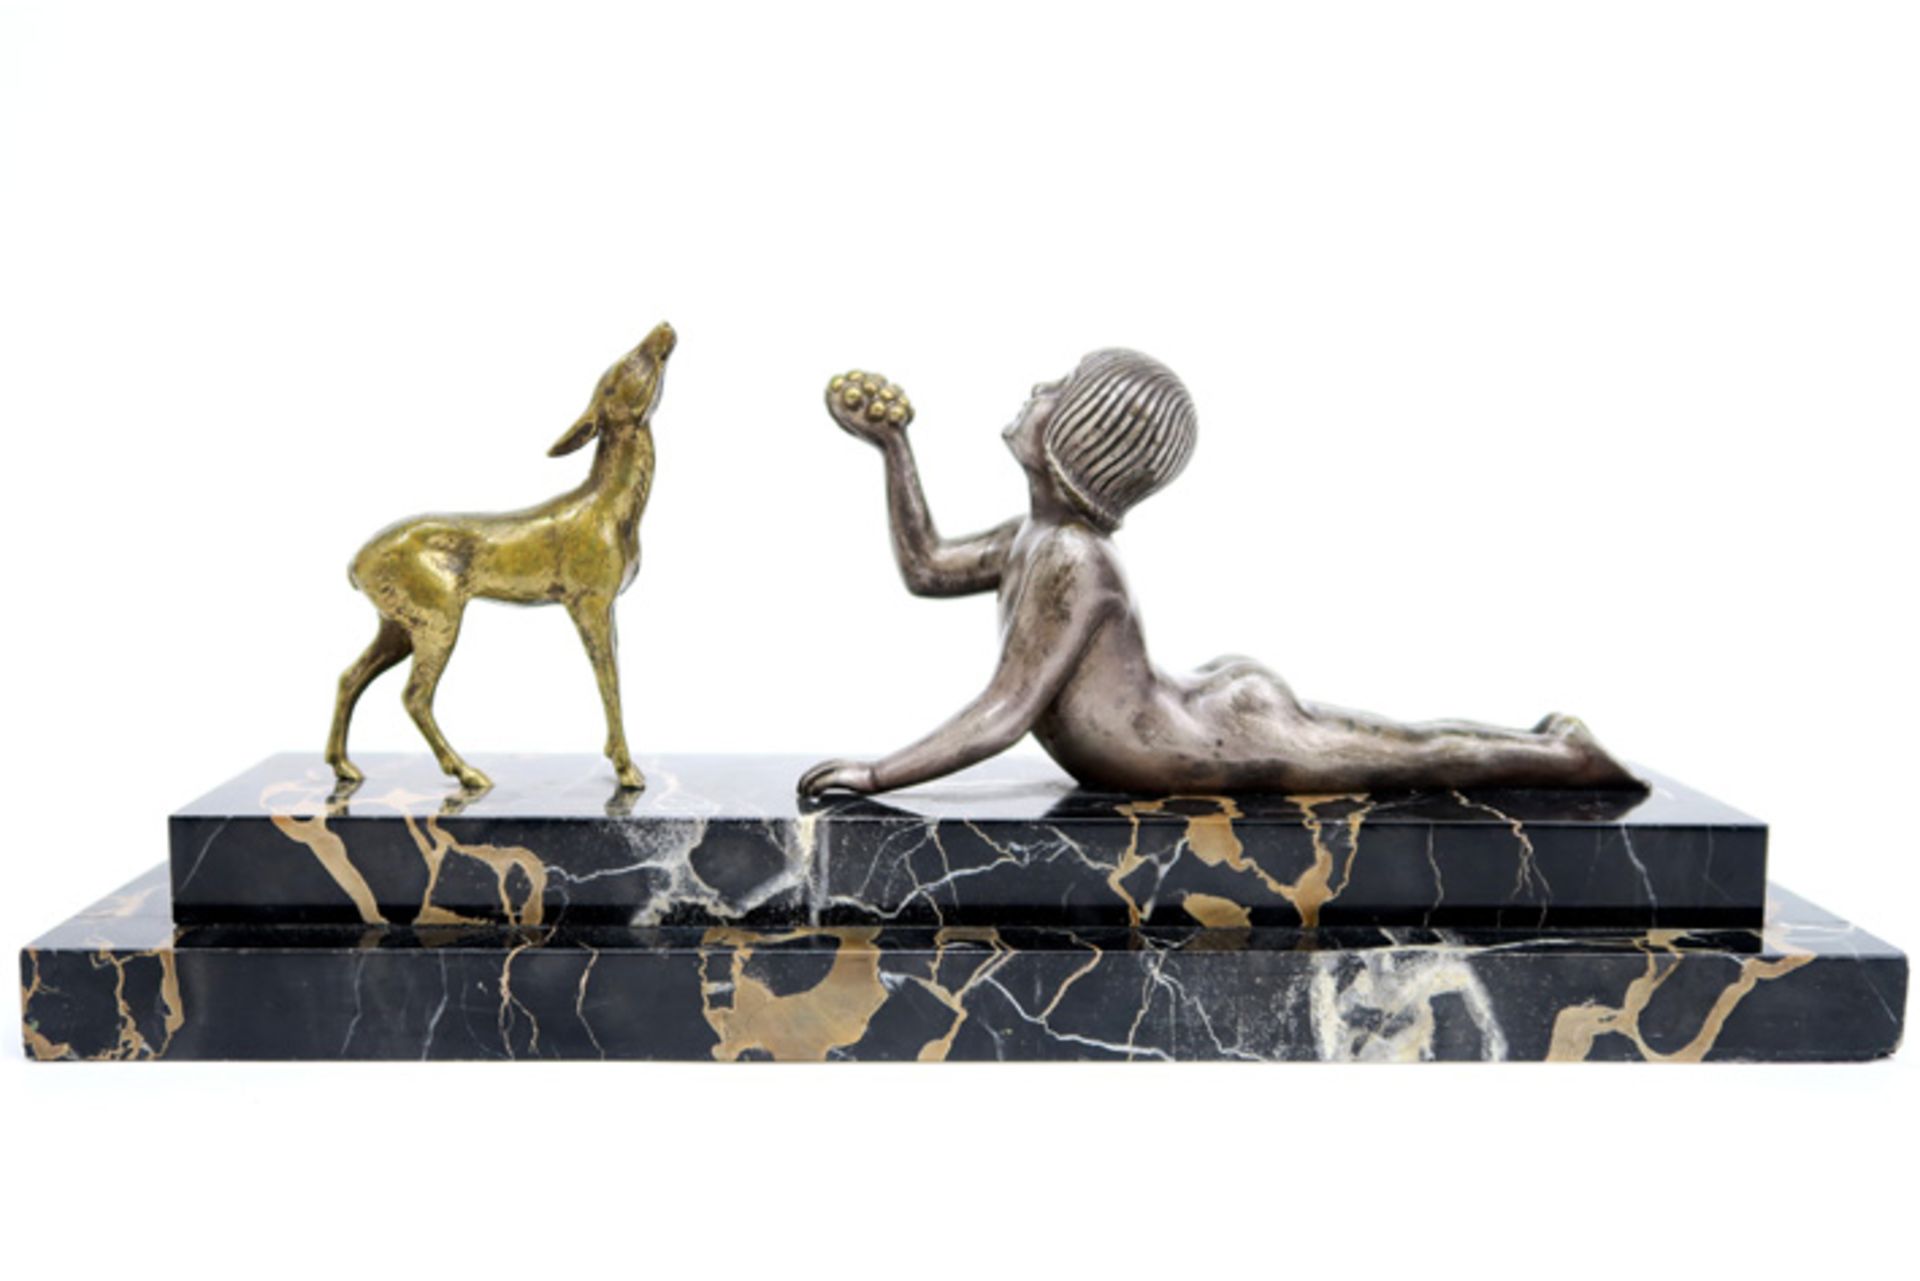 Zoltan Kovats signed double sculpture in bronze on a base in typical marble also with a "Editions